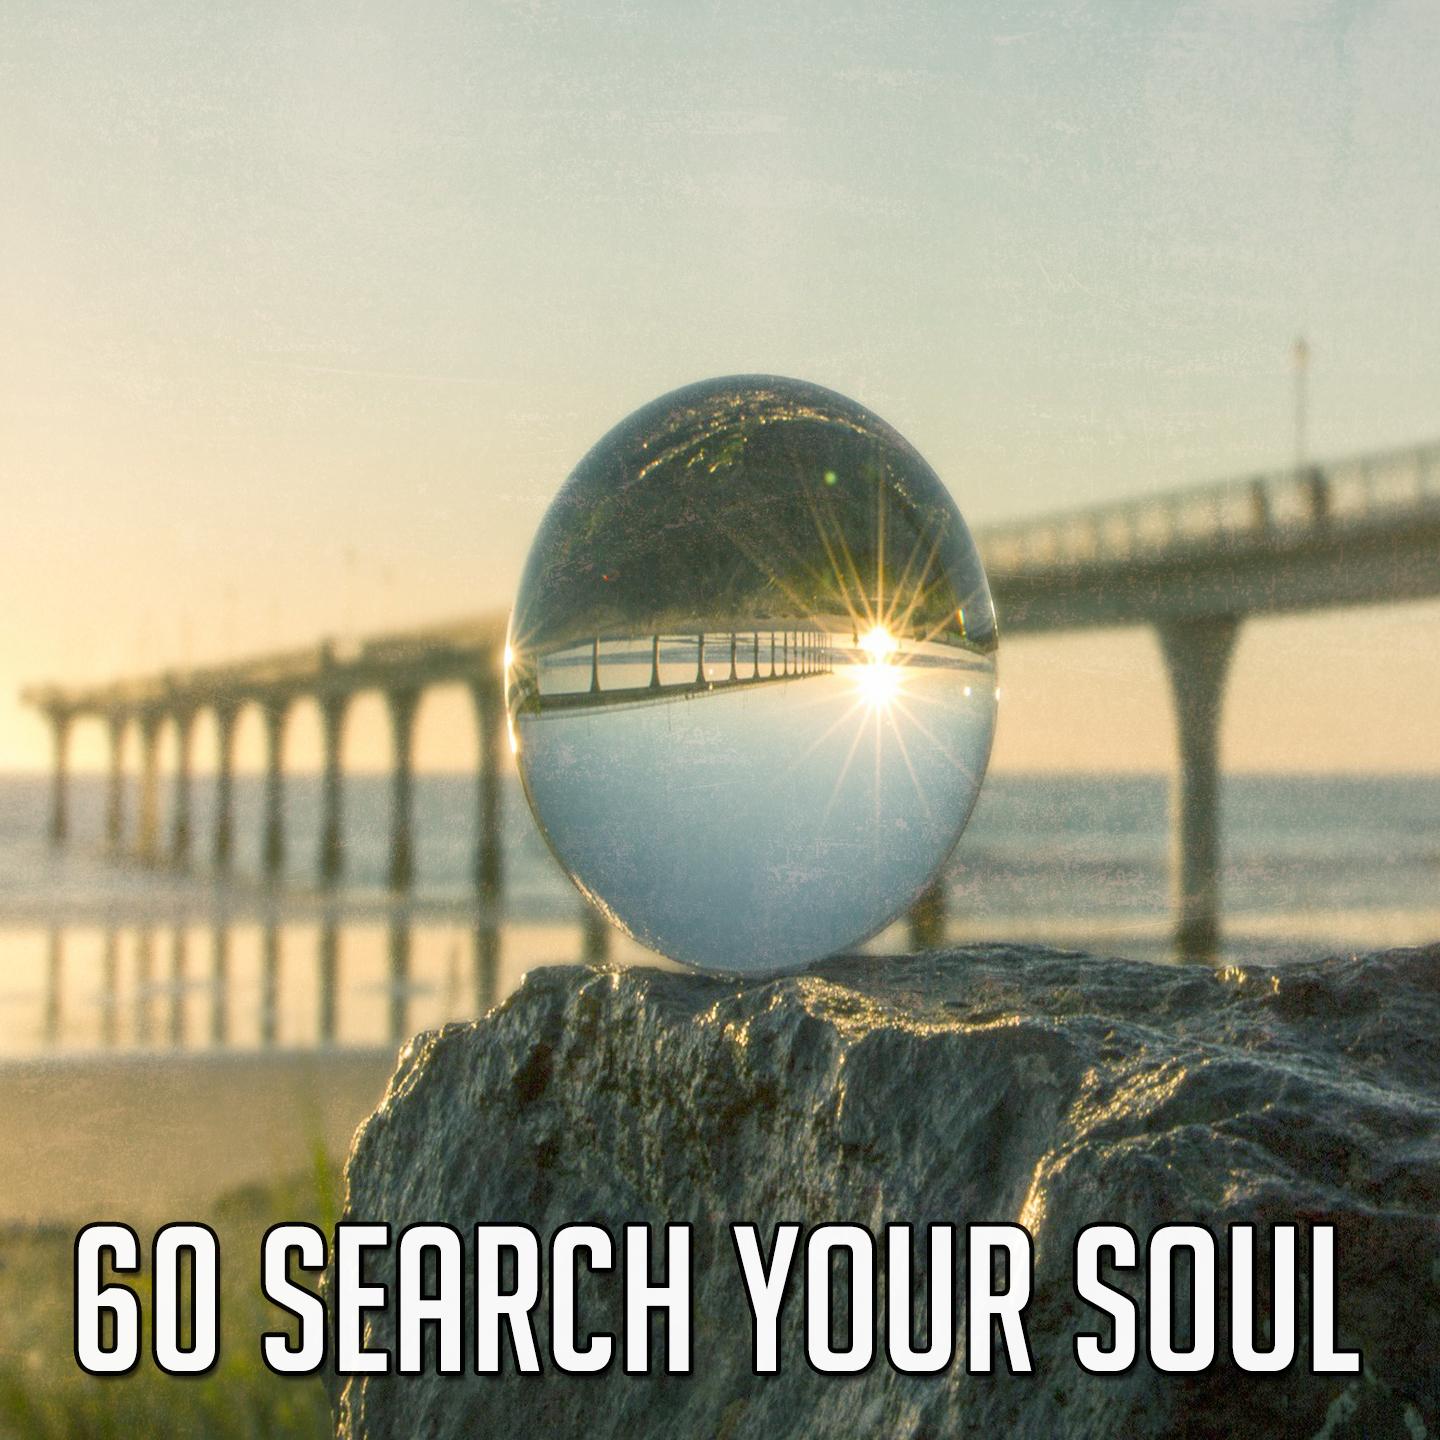 60 Search Your Soul